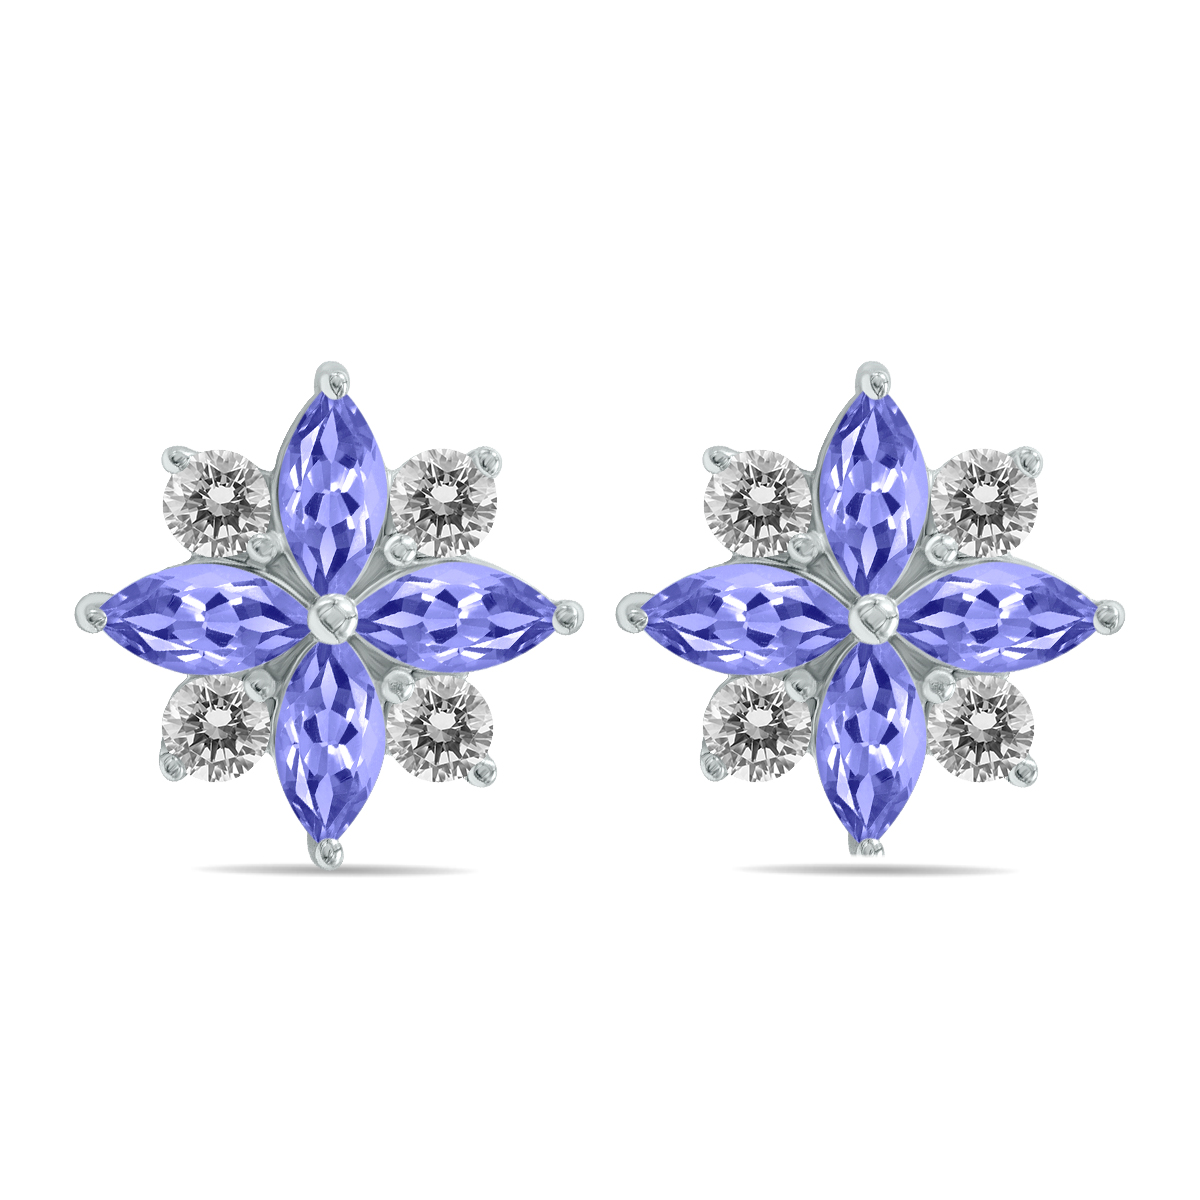 Image of 1 Carat TW Tanzanite and Diamond Flower Earrings in 10K White Gold